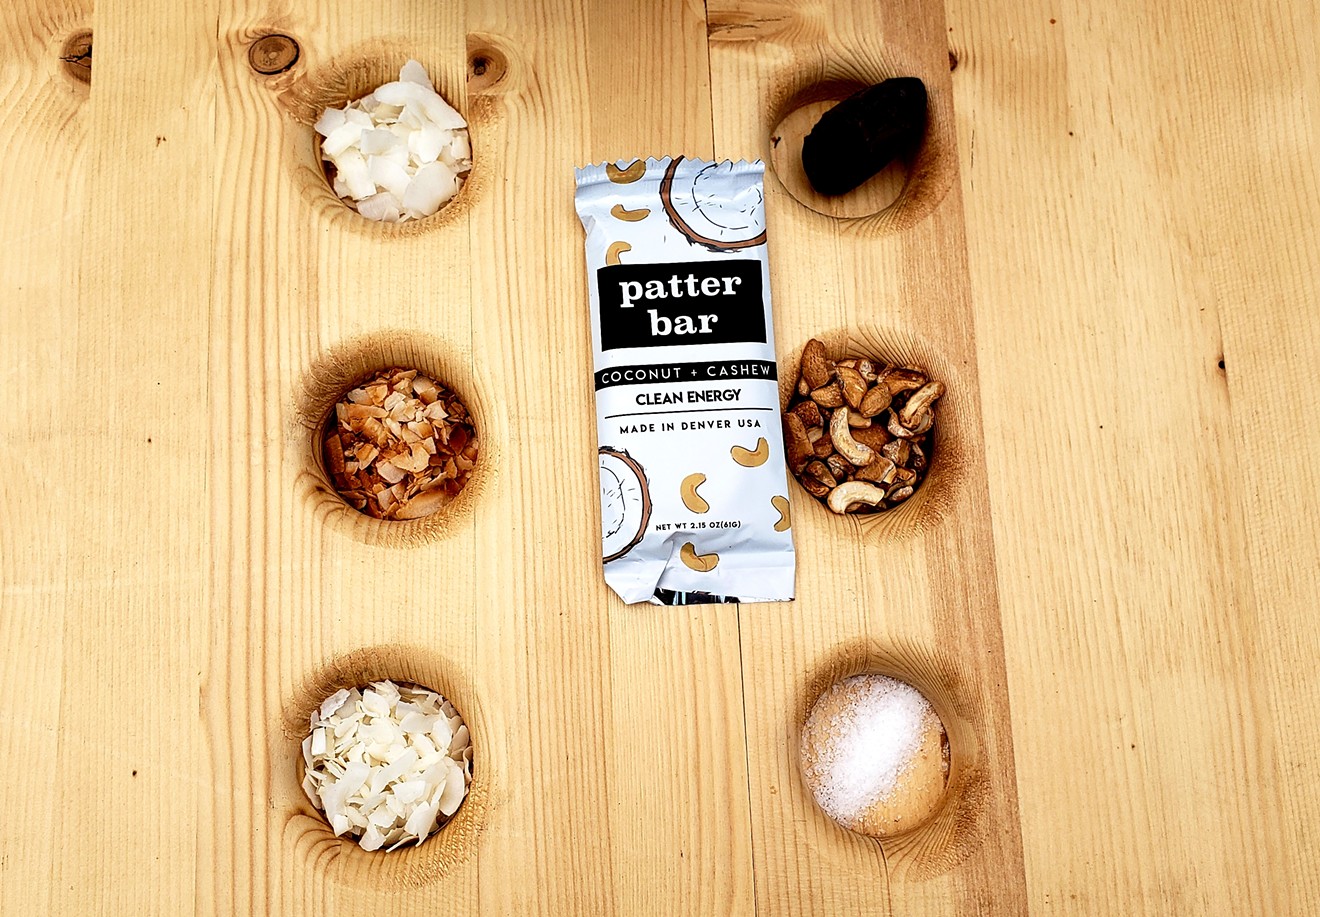 Patter Gersuk created a "clean" energy bar using all these ingredients. It's called the Patterbar, and you can find it at the South Pearl Street Farmers' Market.